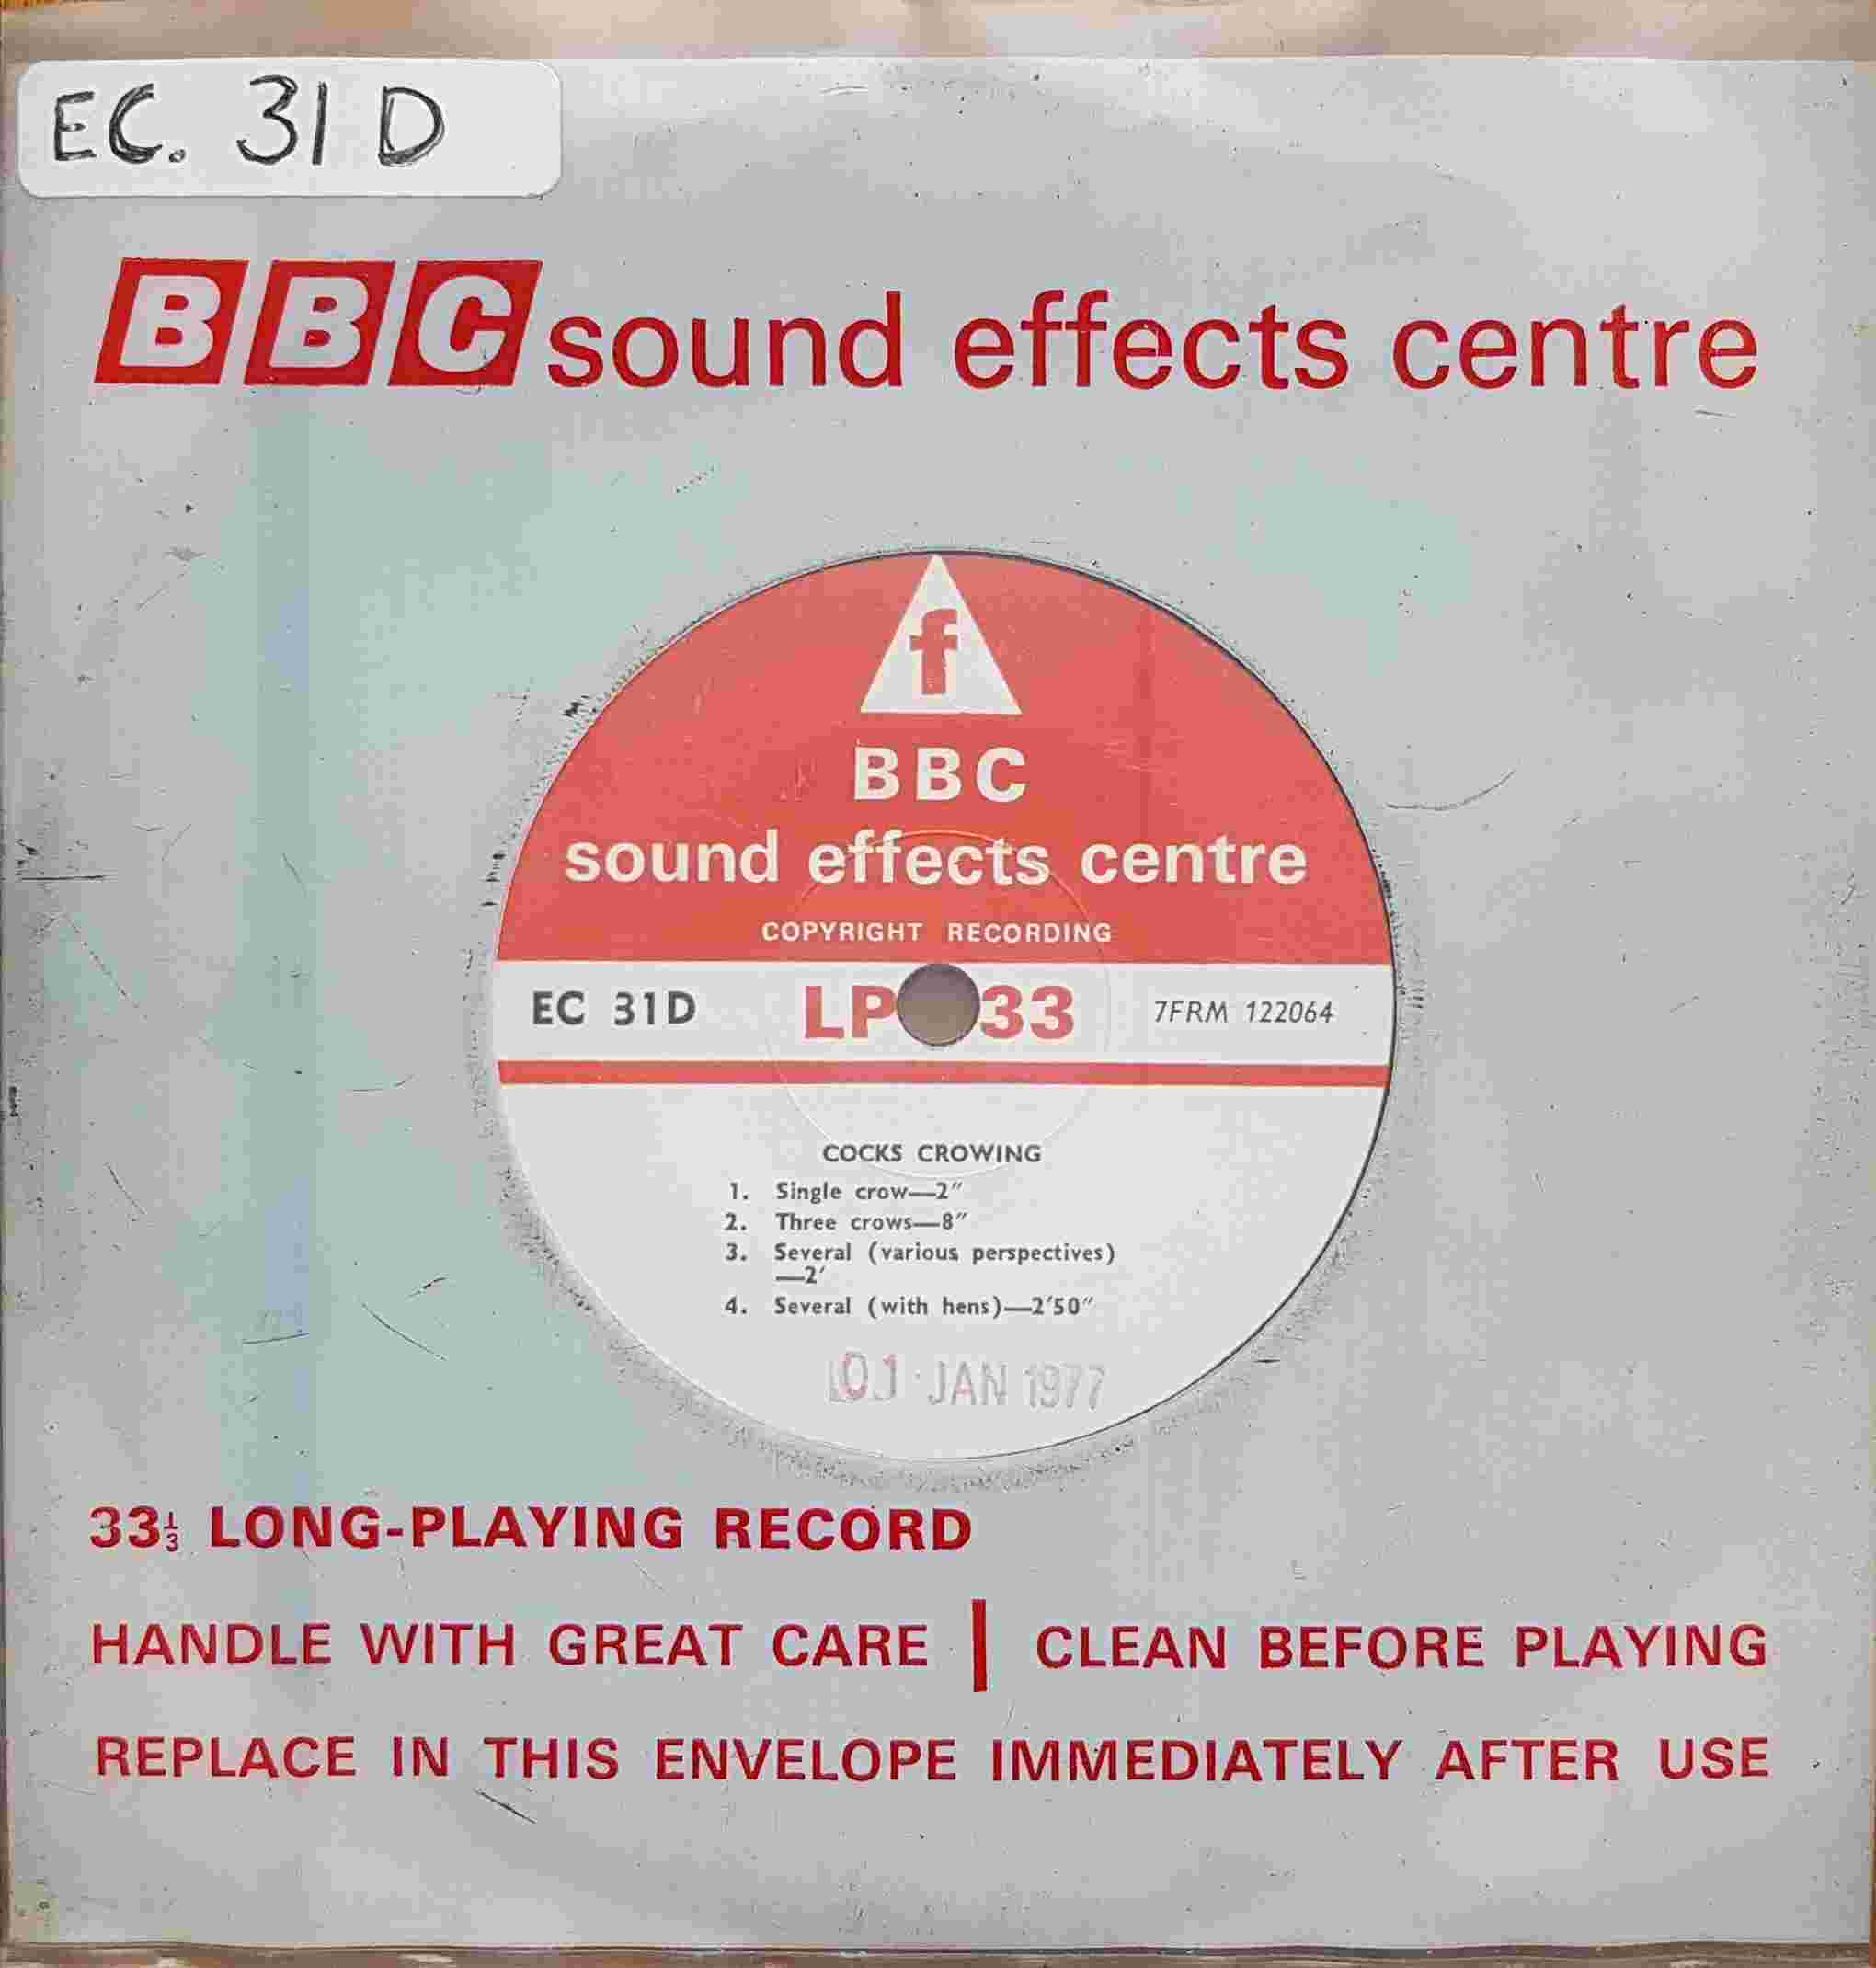 Picture of EC 31D Cocks crowing / Chickens by artist Not registered from the BBC records and Tapes library